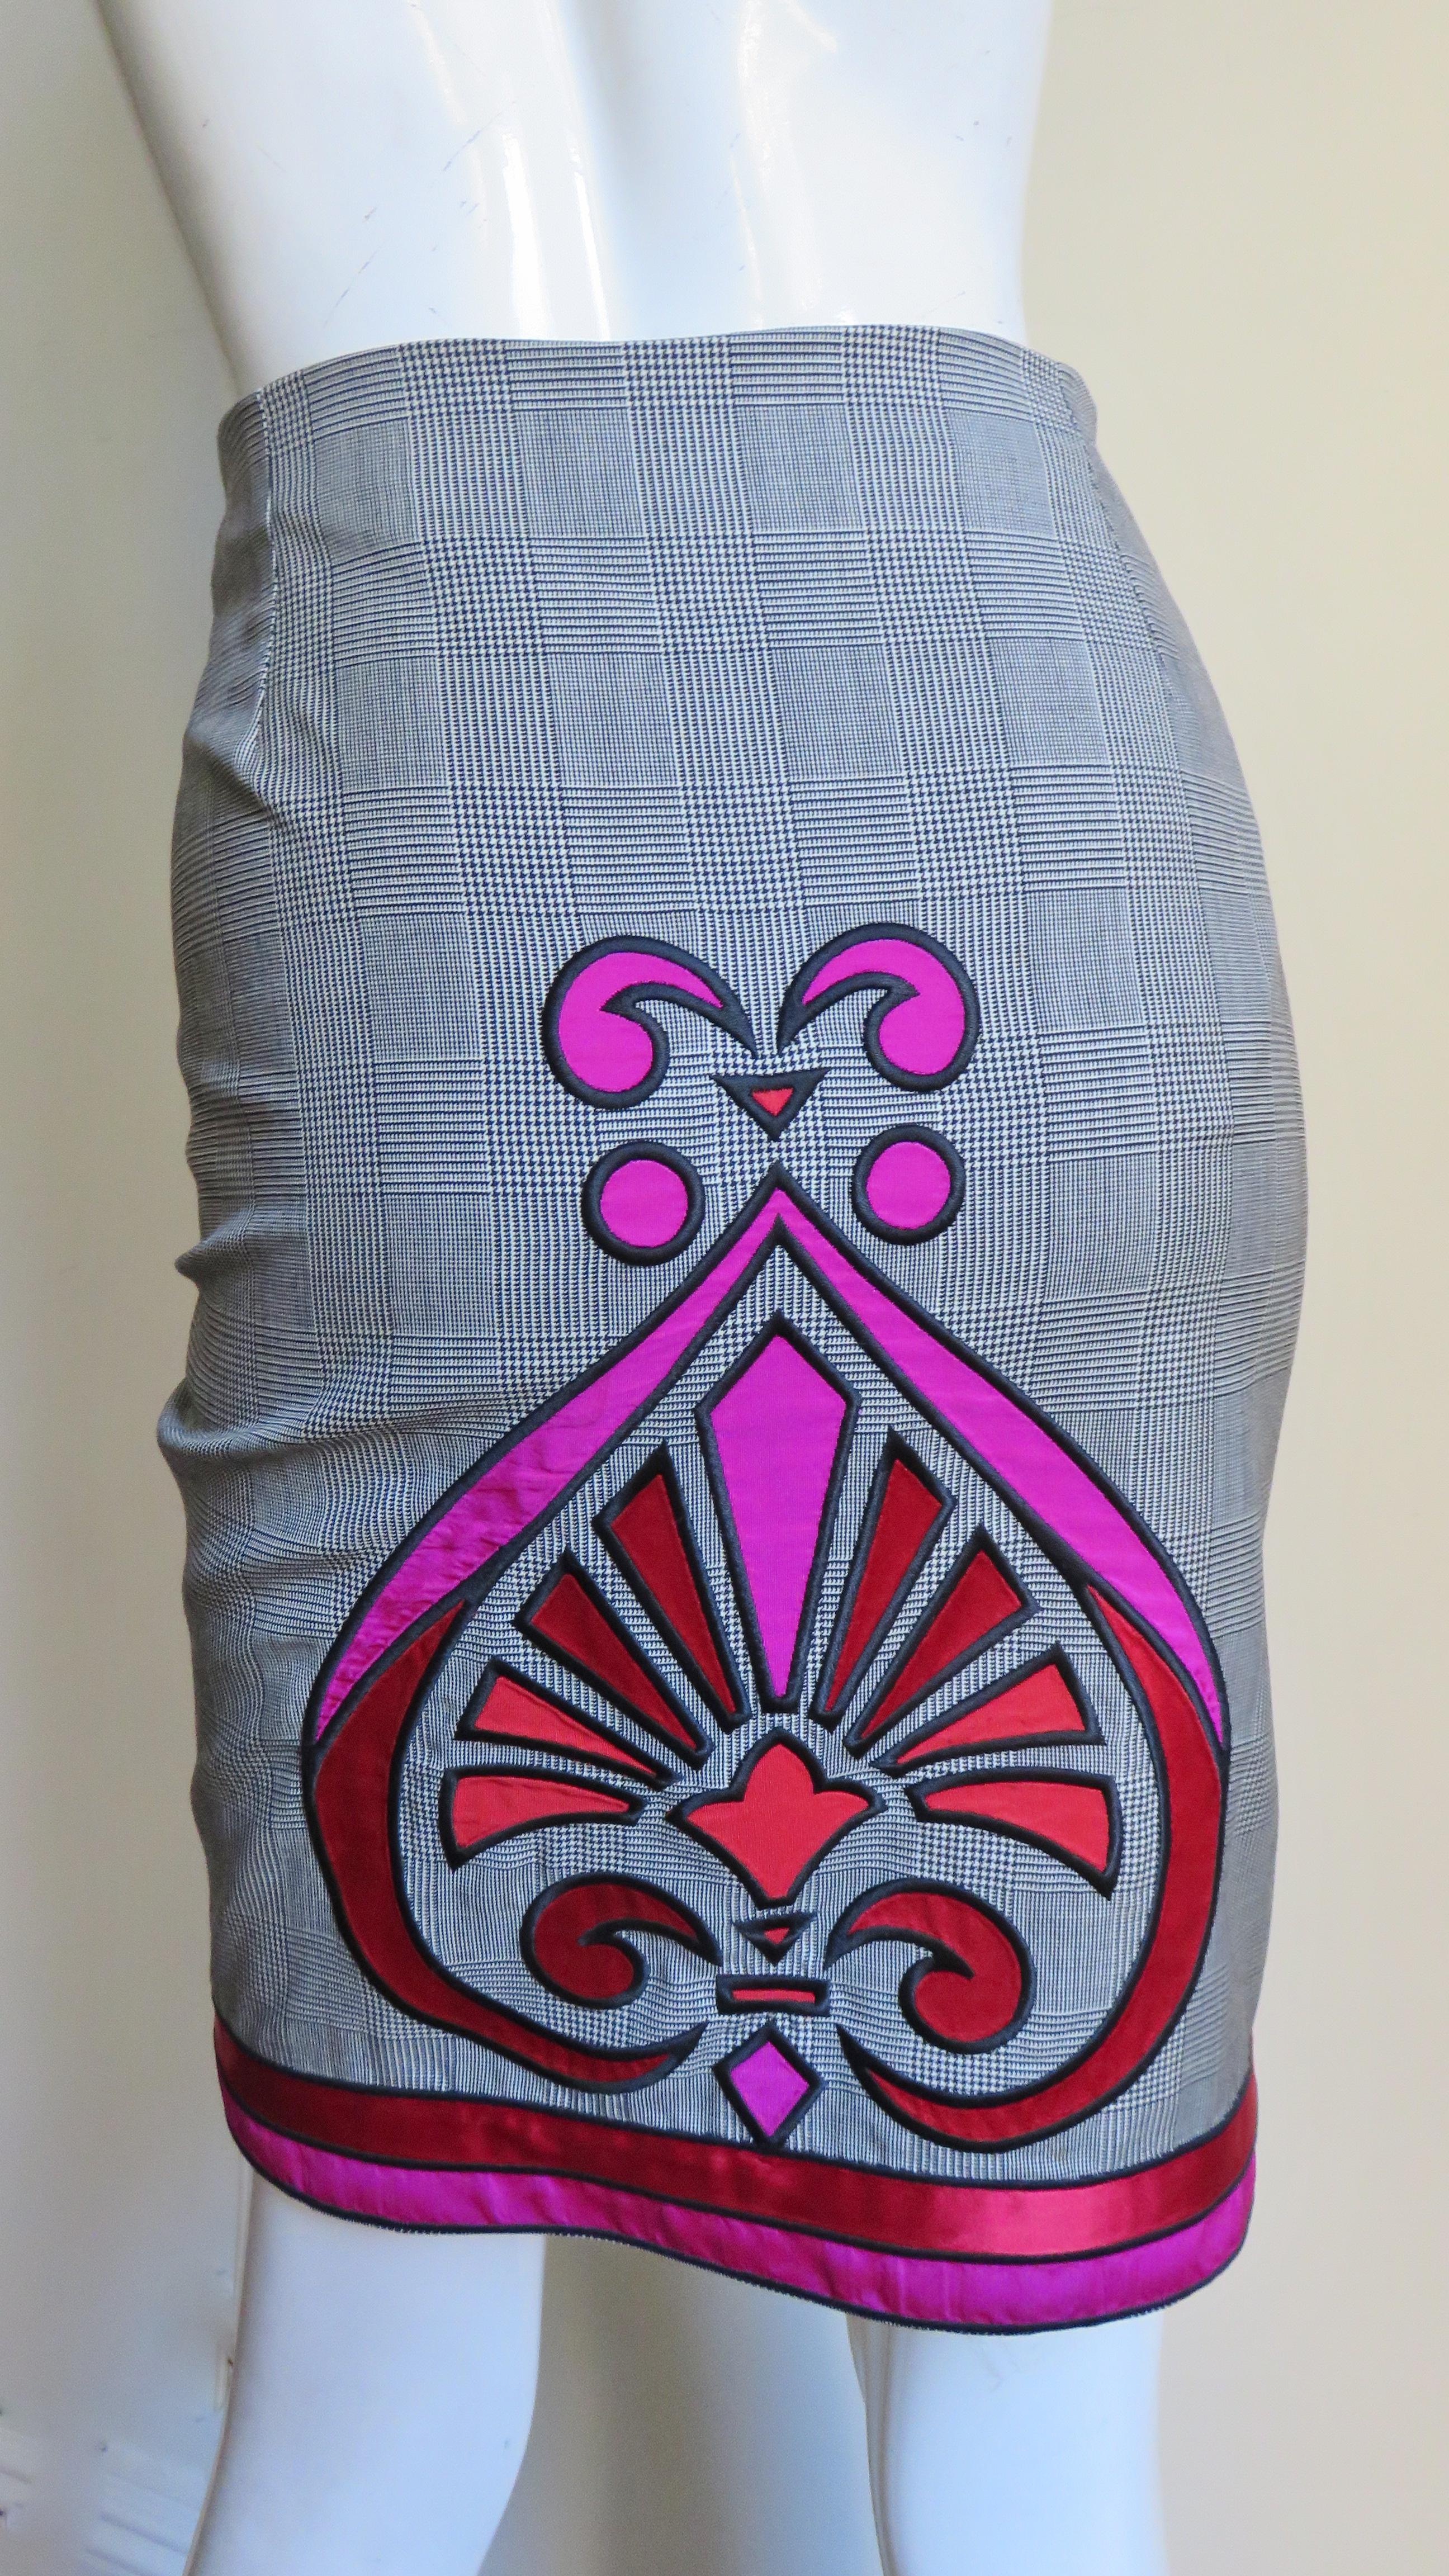 Gianni Versace Reversible Skirt with Elaborate Applique 1990s For Sale 4